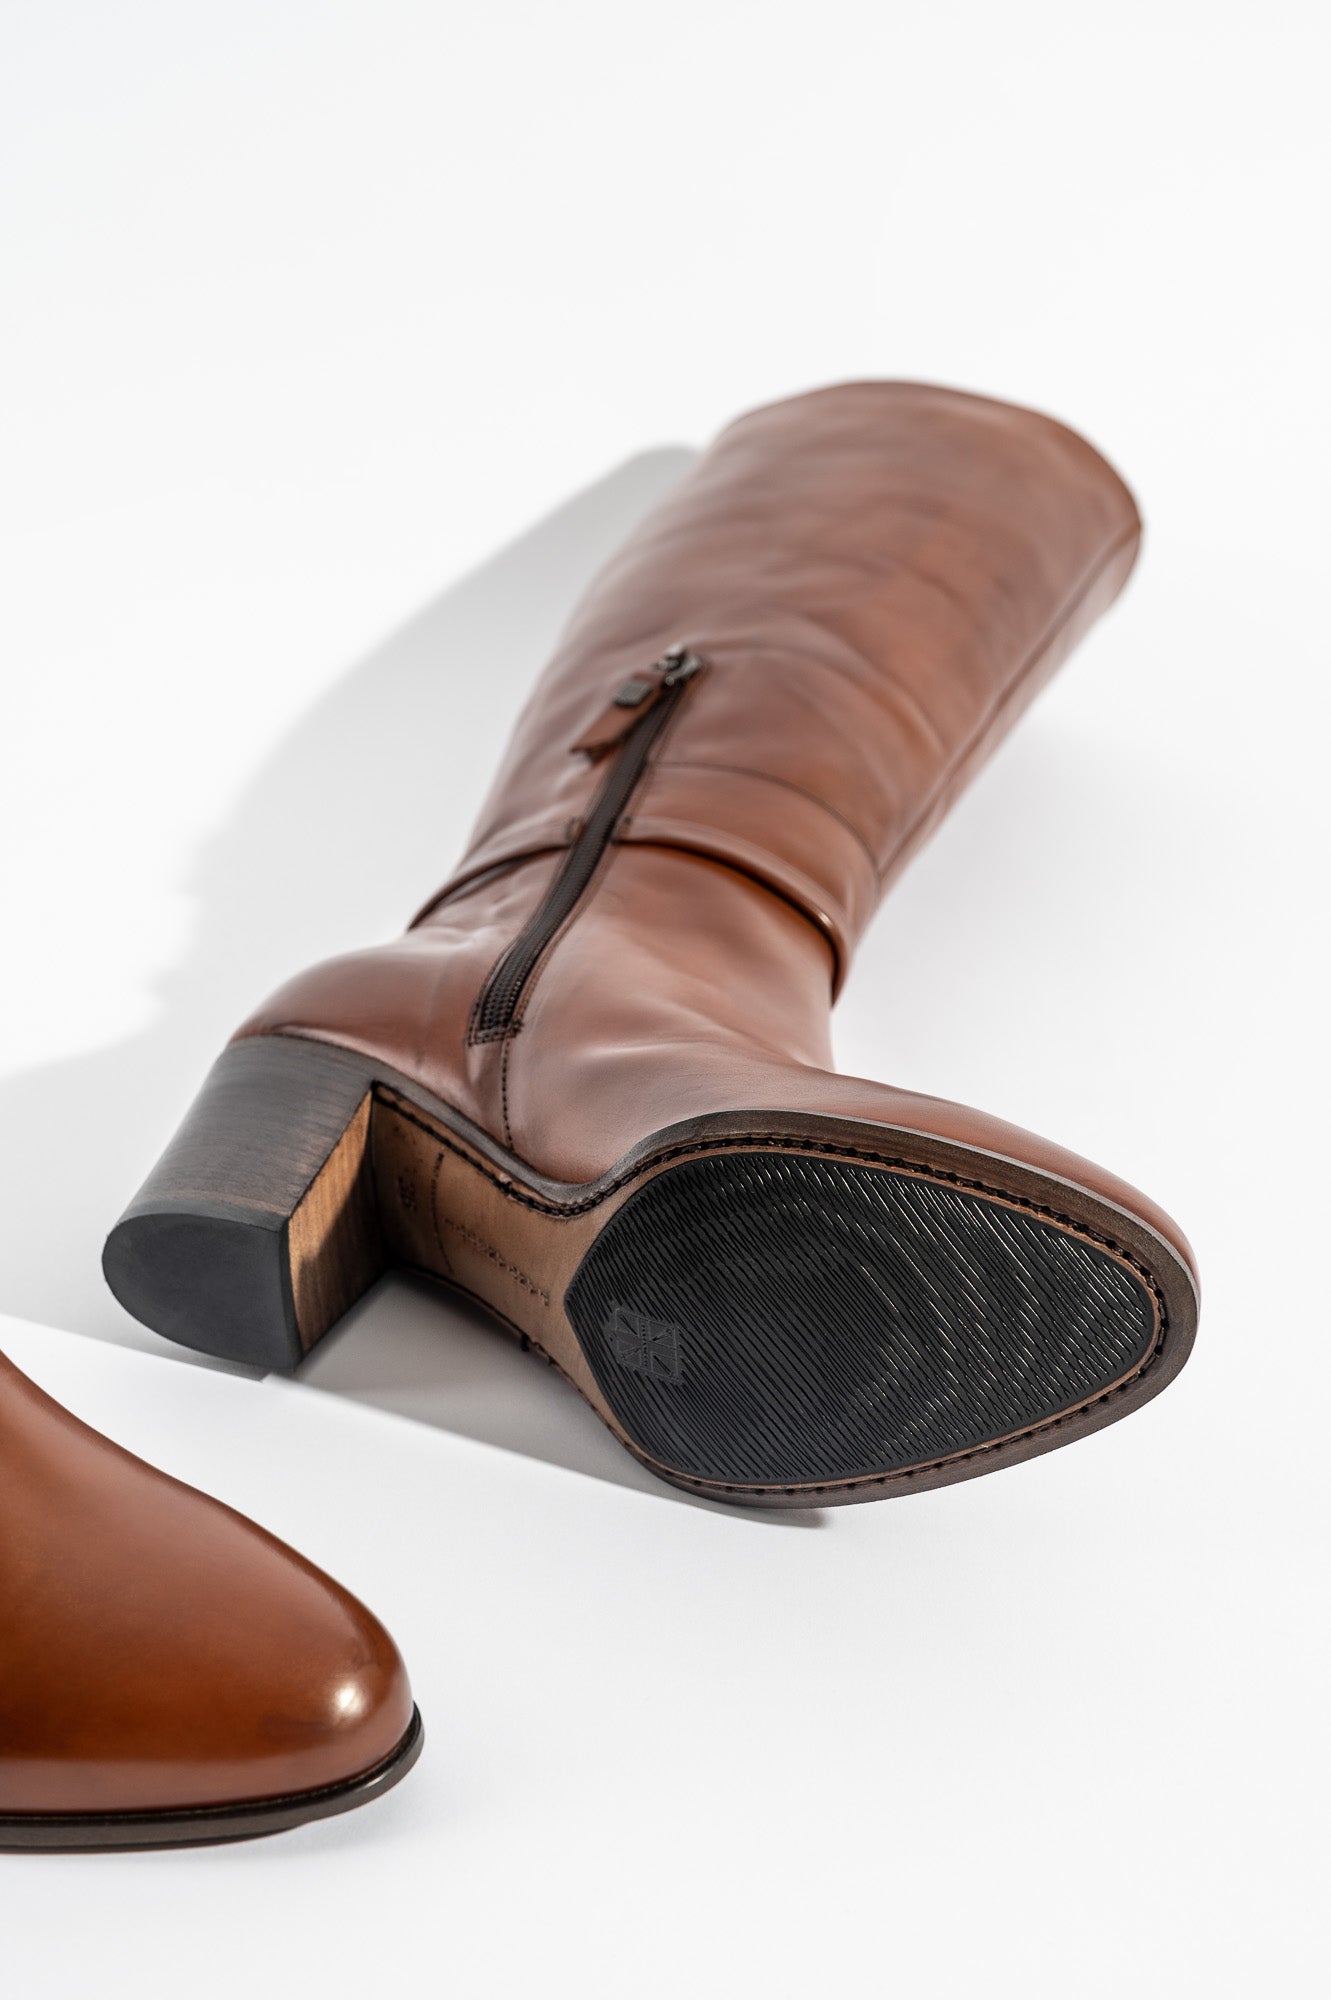 High Boot Cristal 510 | Cognac Leather